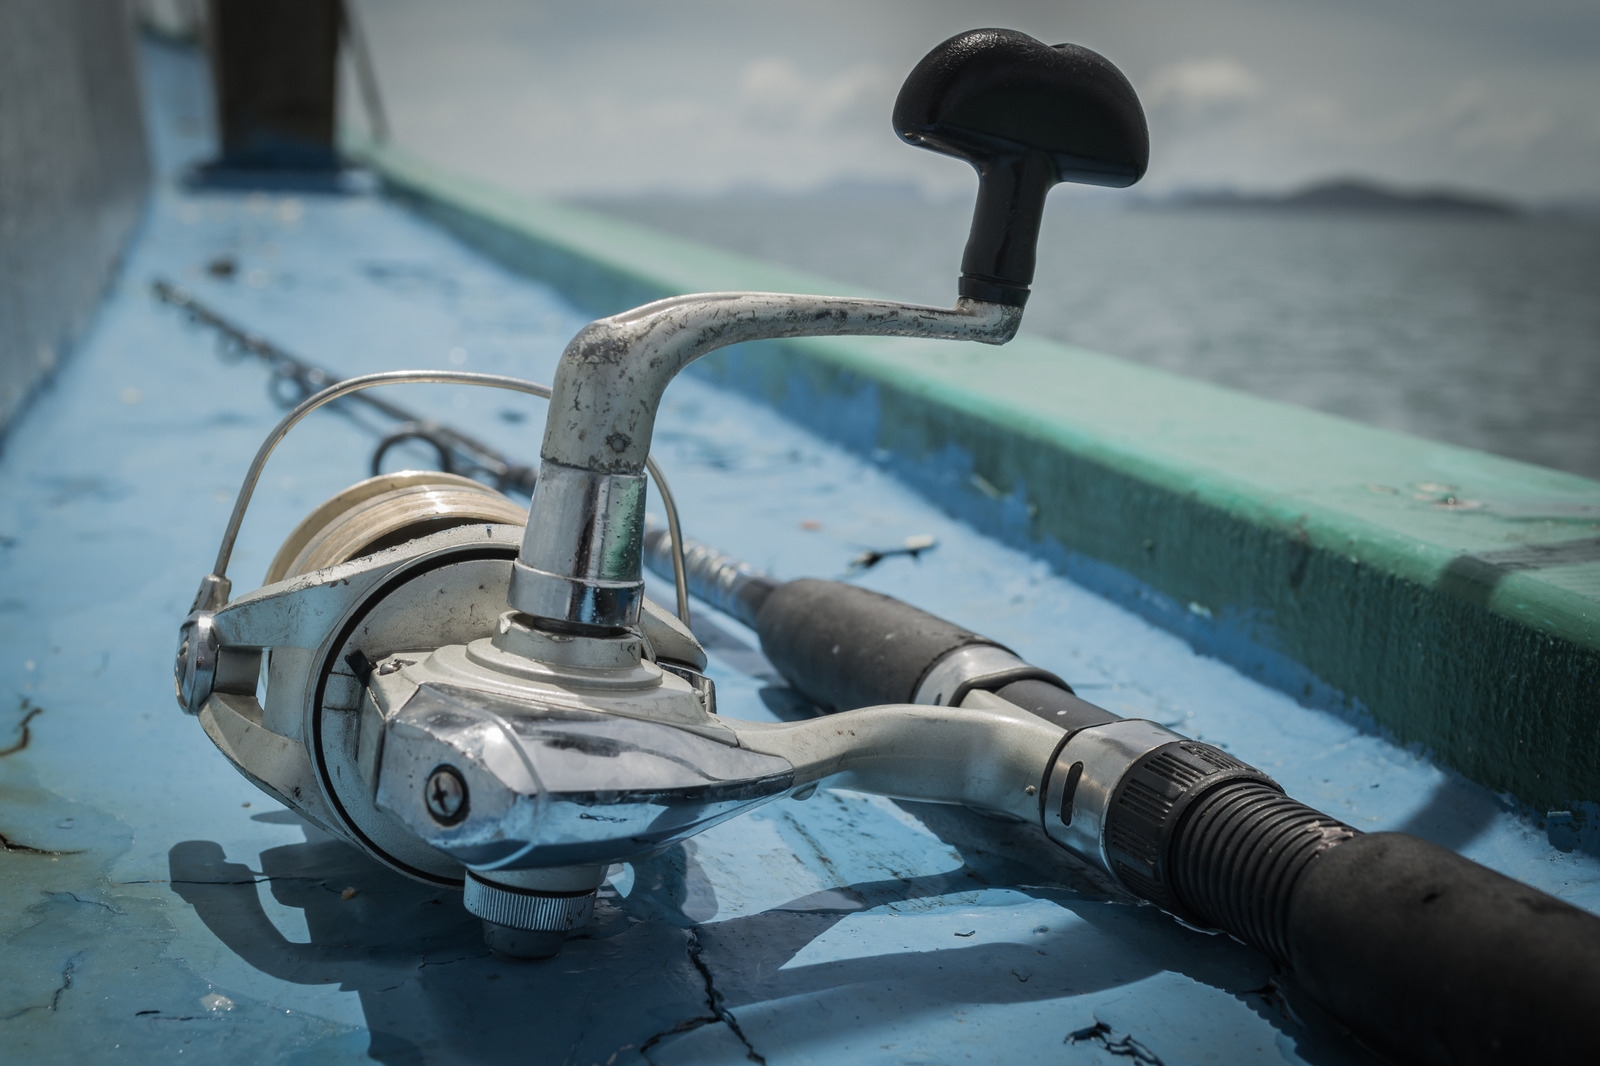 old fishing rod on the boat under sunlight